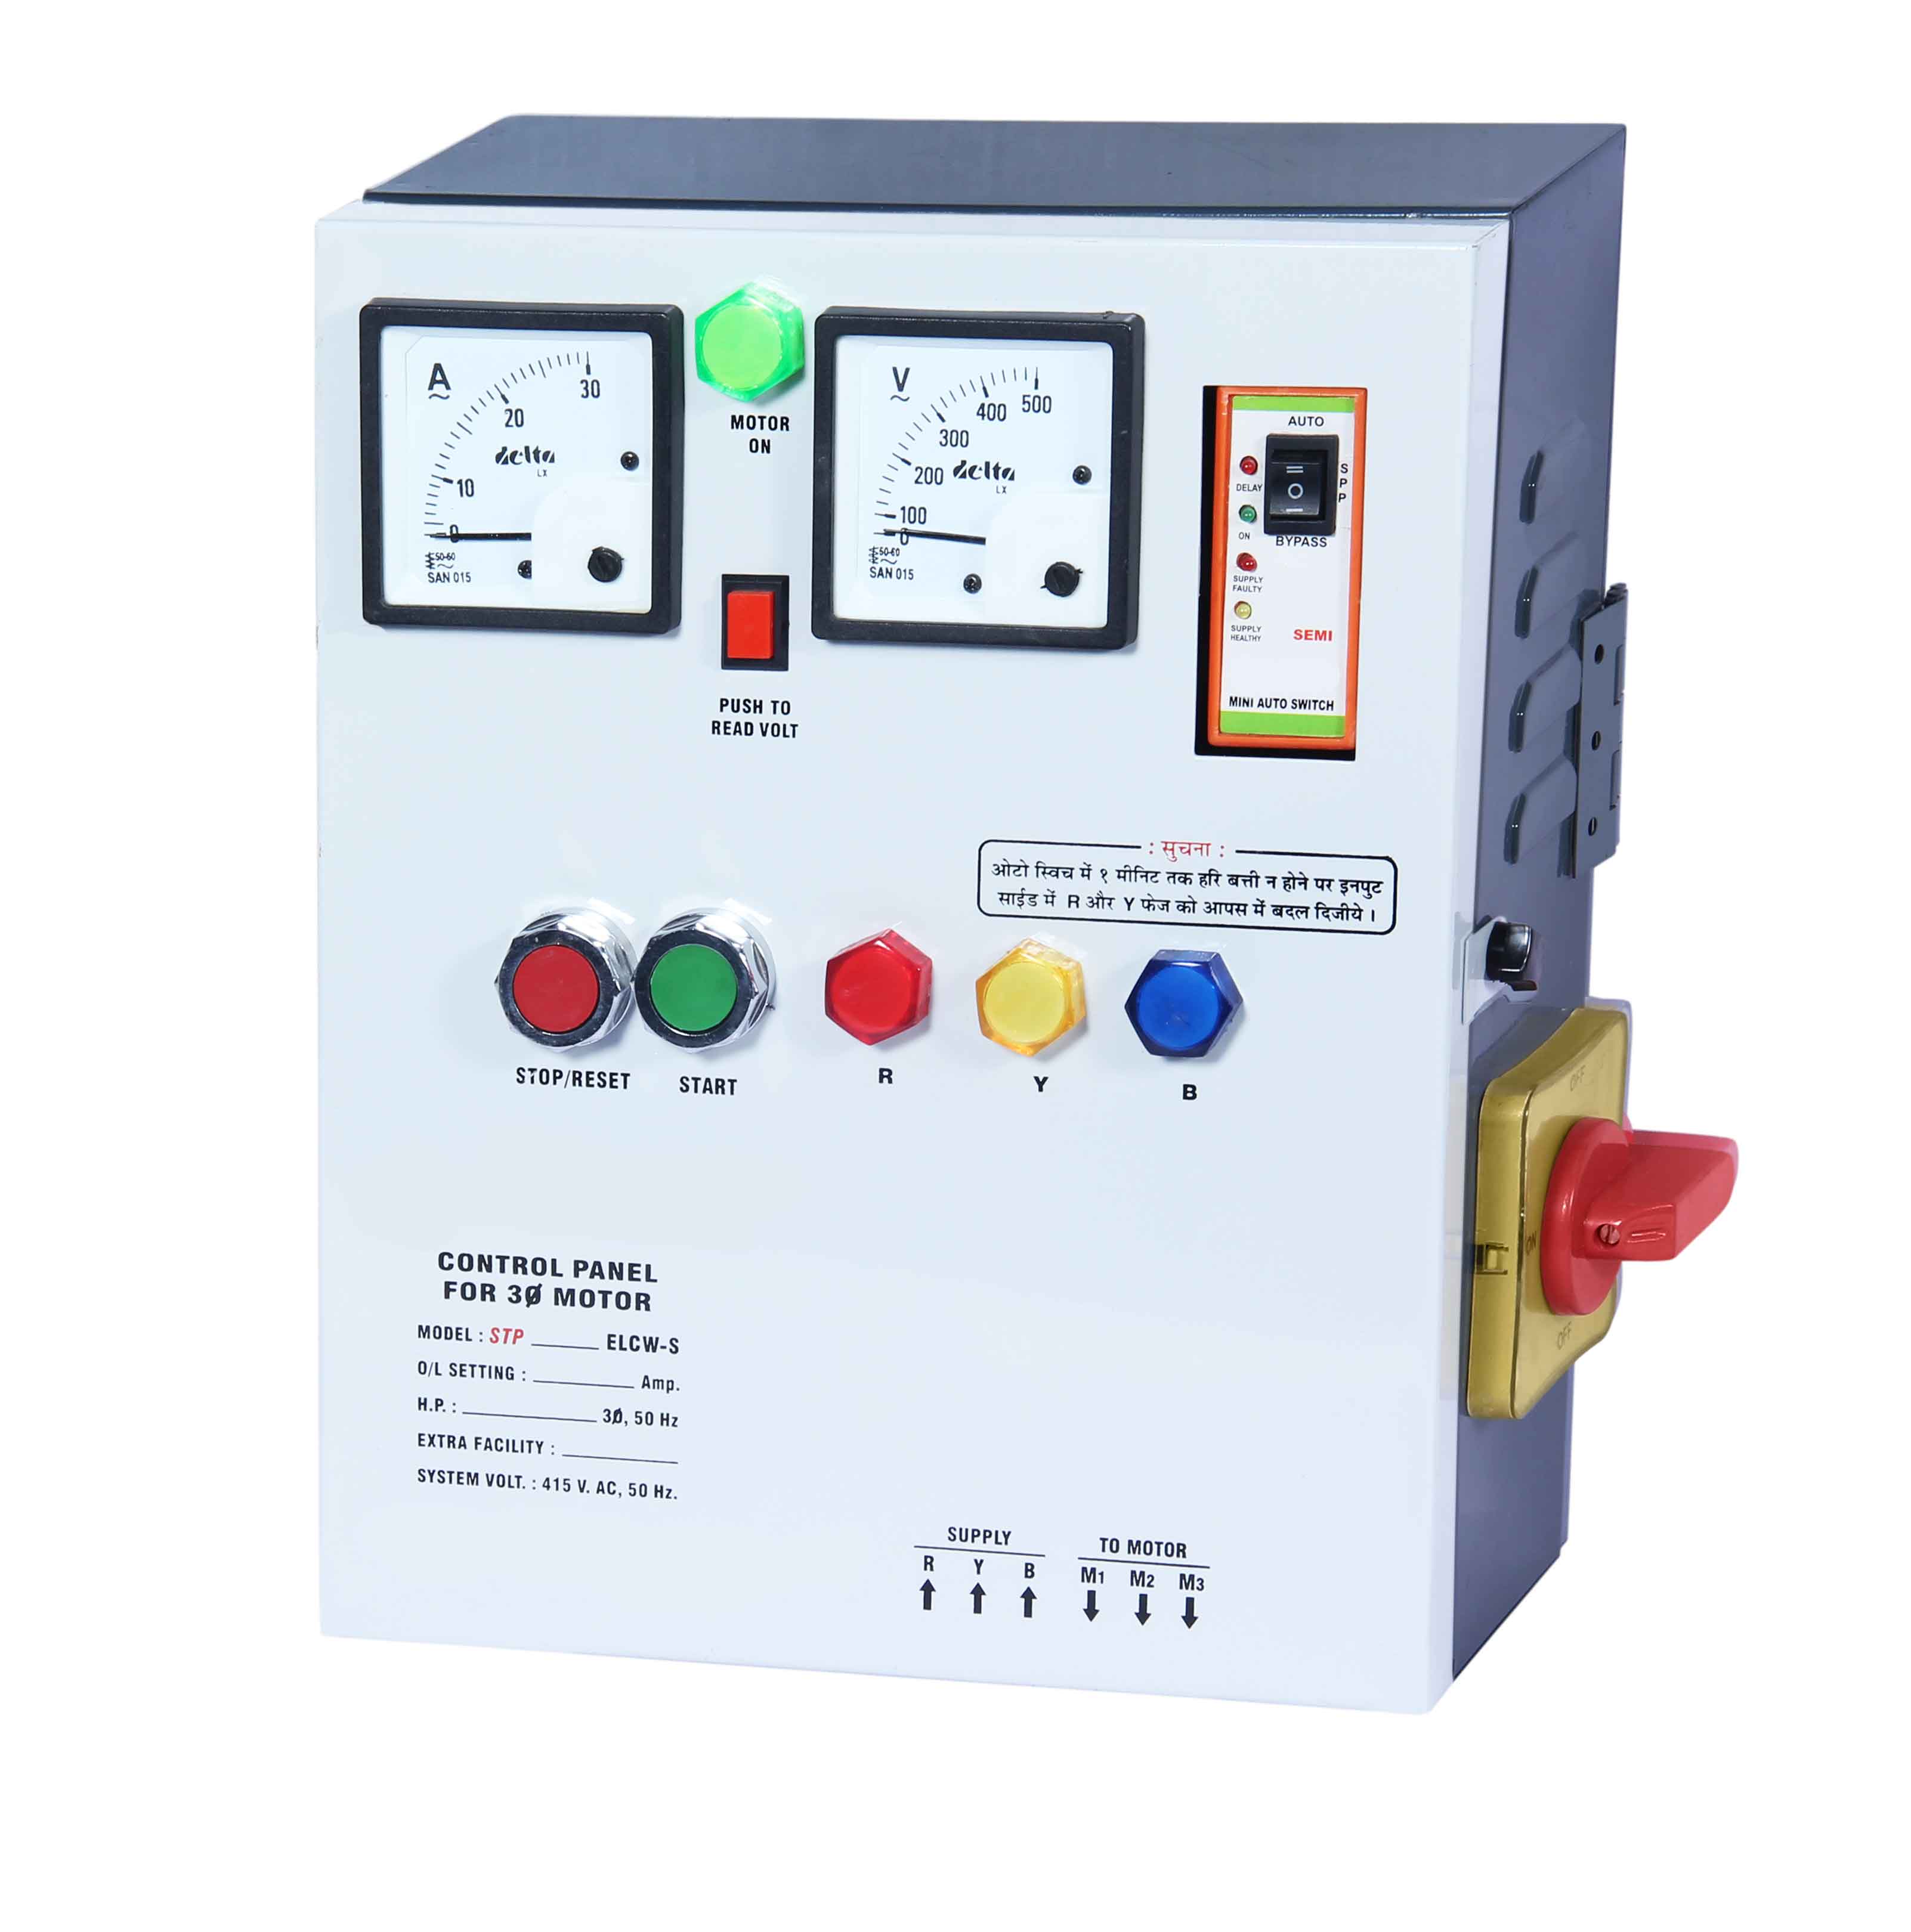 ELCW S electronic starter for 3 phase motor suitable up to 7.5 hp motor with rotary switch and volt amp meter